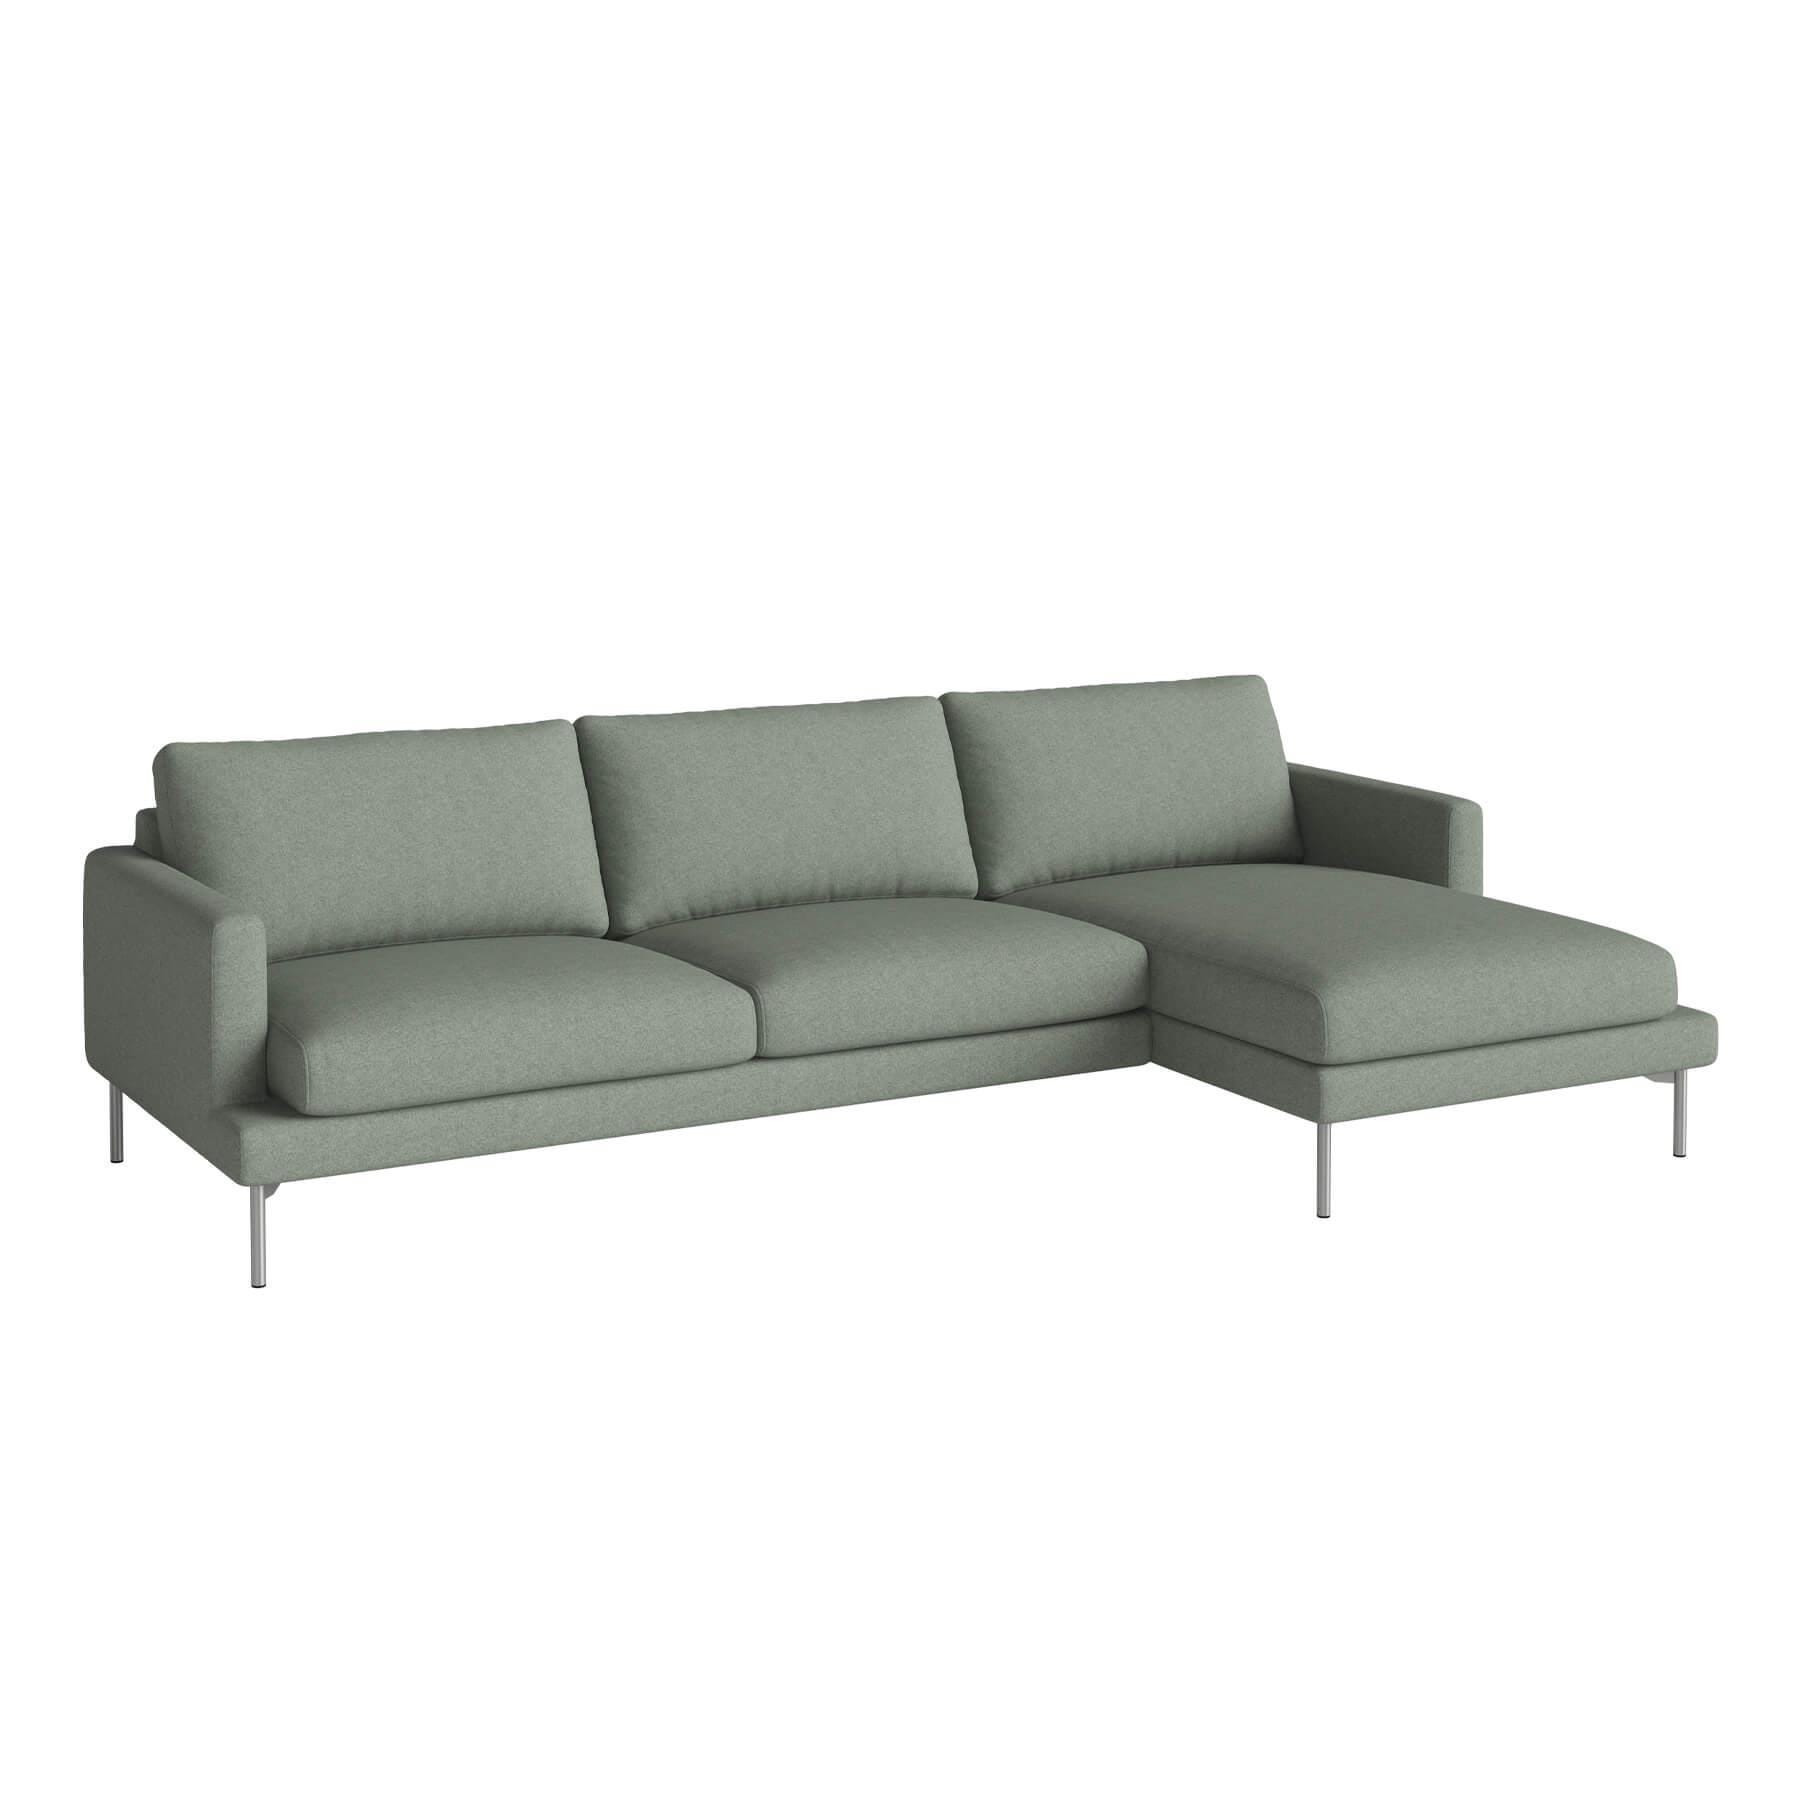 Bolia Veneda Sofa 35 Seater Sofa With Chaise Longue Brushed Steel Qual Green Right Green Designer Furniture From Holloways Of Ludlow